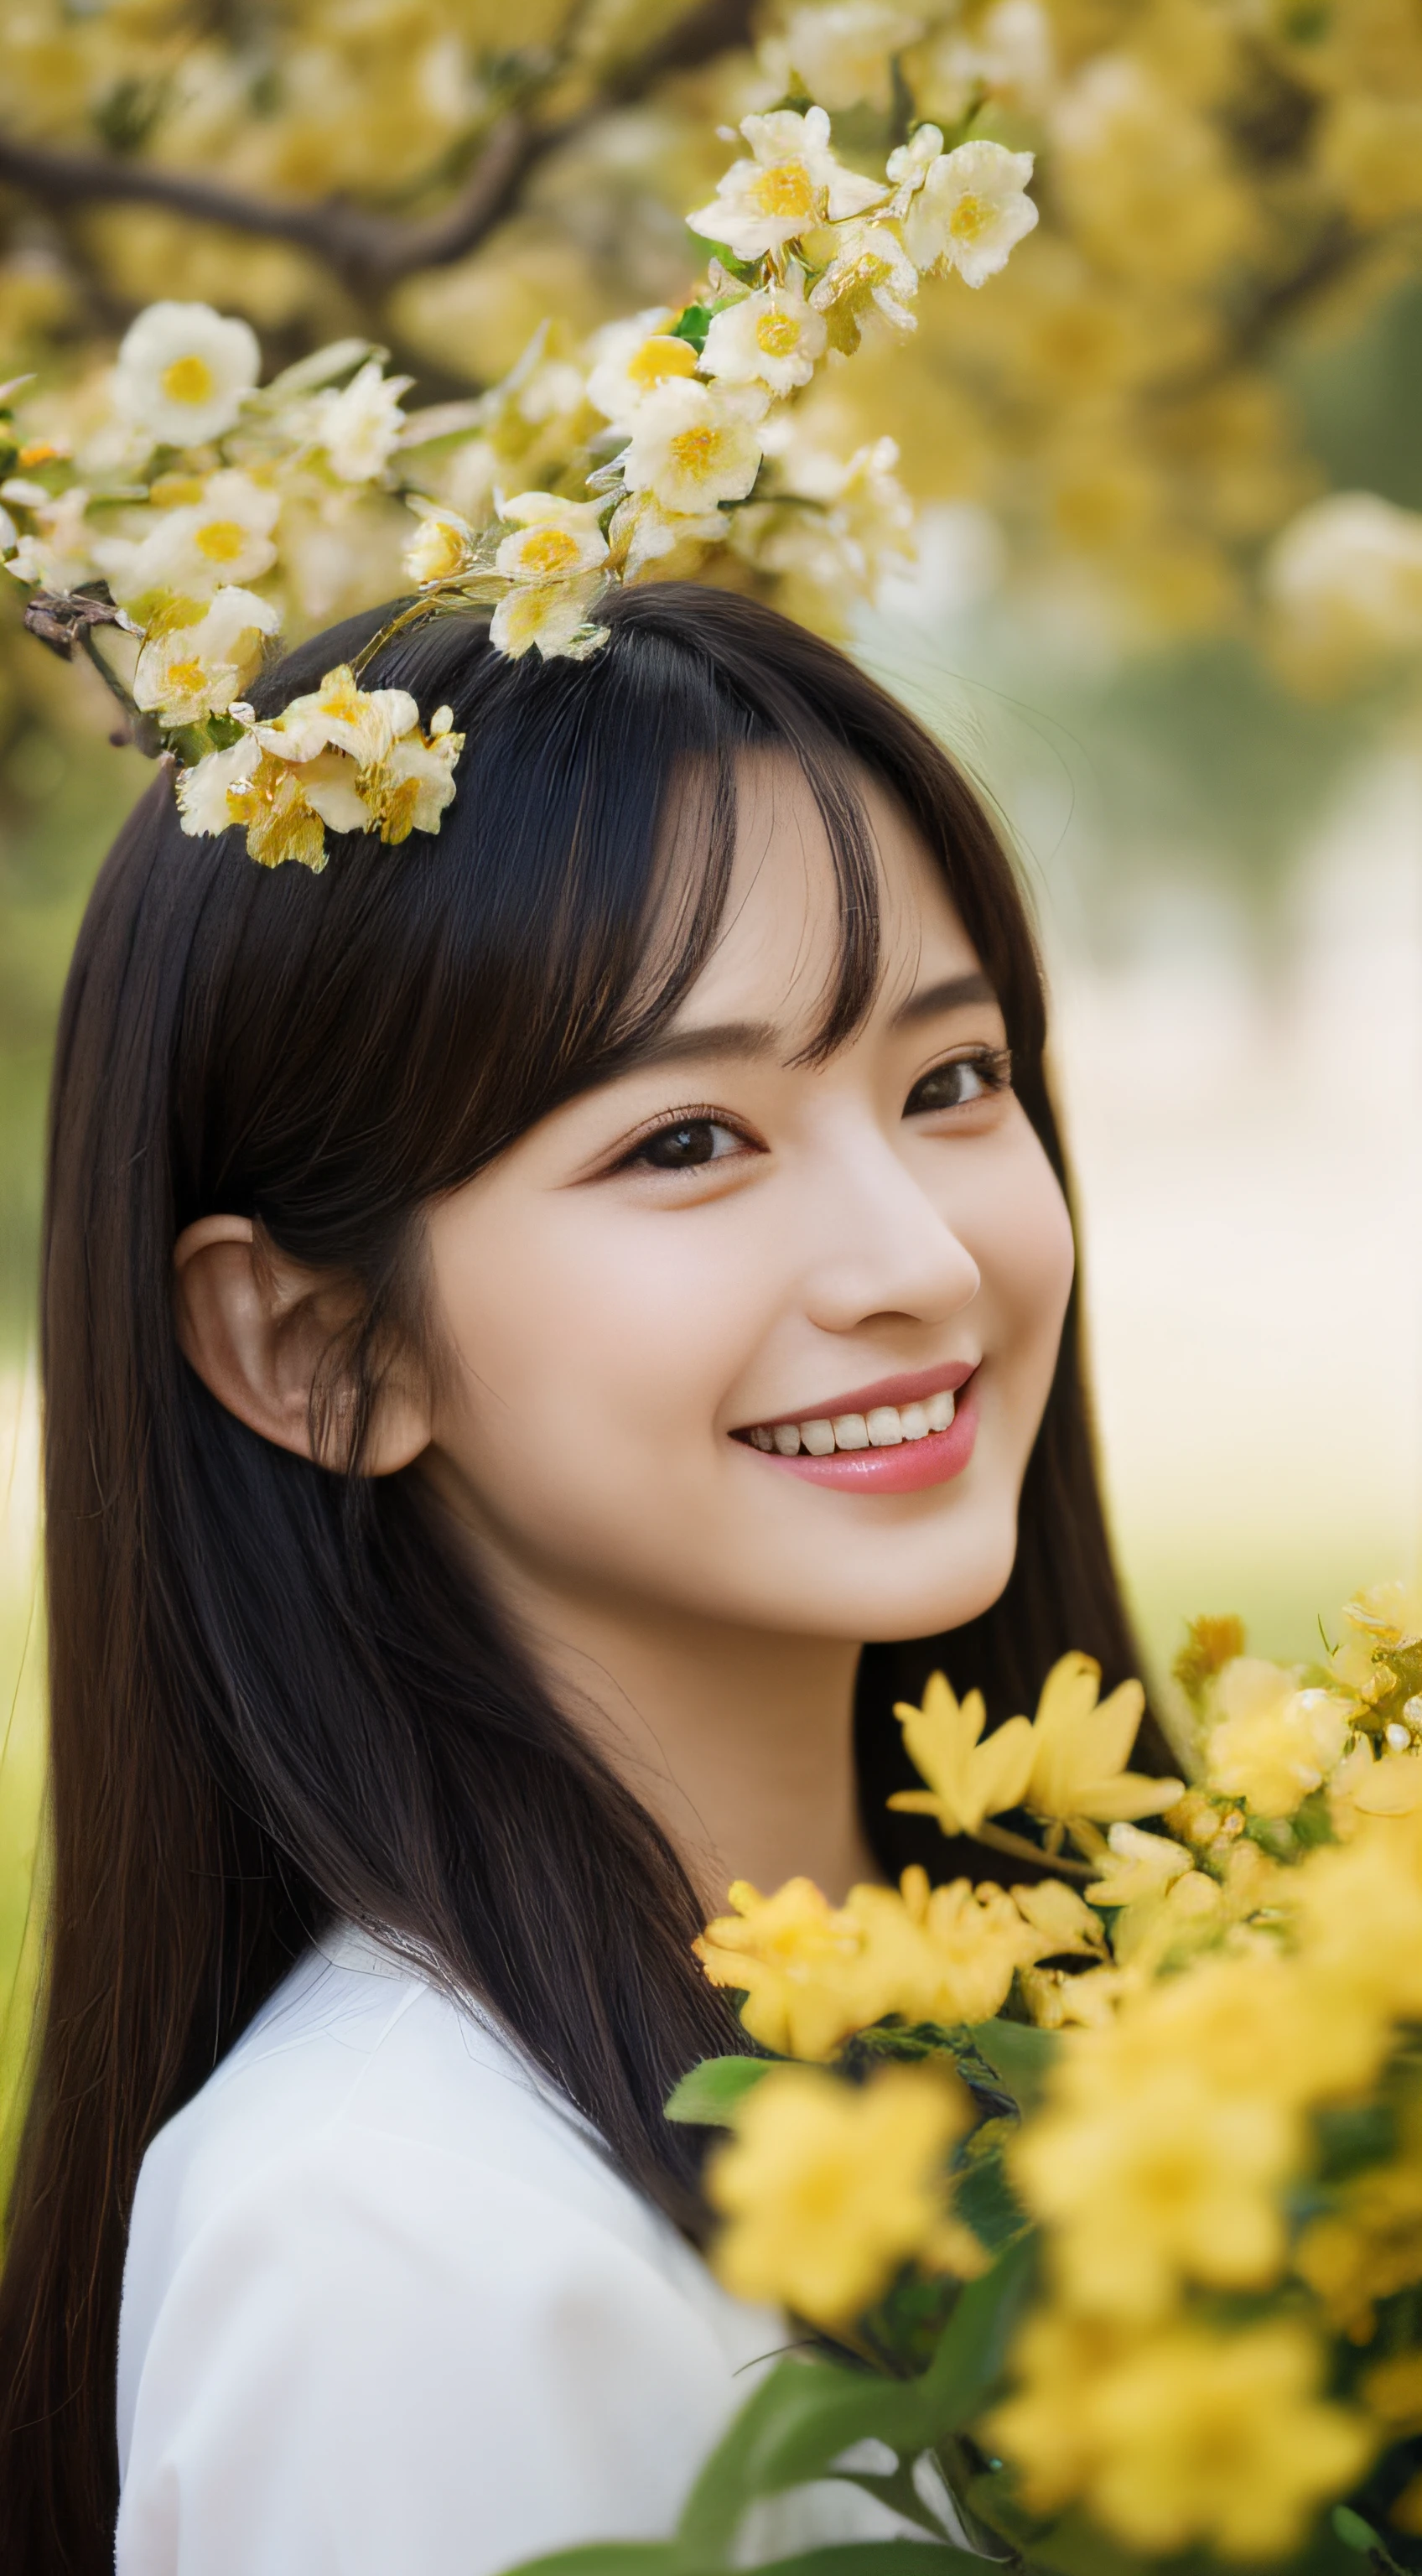 masterpiece, best quality, realistic, cinematic,
1girl, standing, close-up portrait, red aodai, (smile:1), (yellow apricot blossom, (potted flowers:0.8), flowers, falling petals, tree branch),  flower in hair, walking in garden